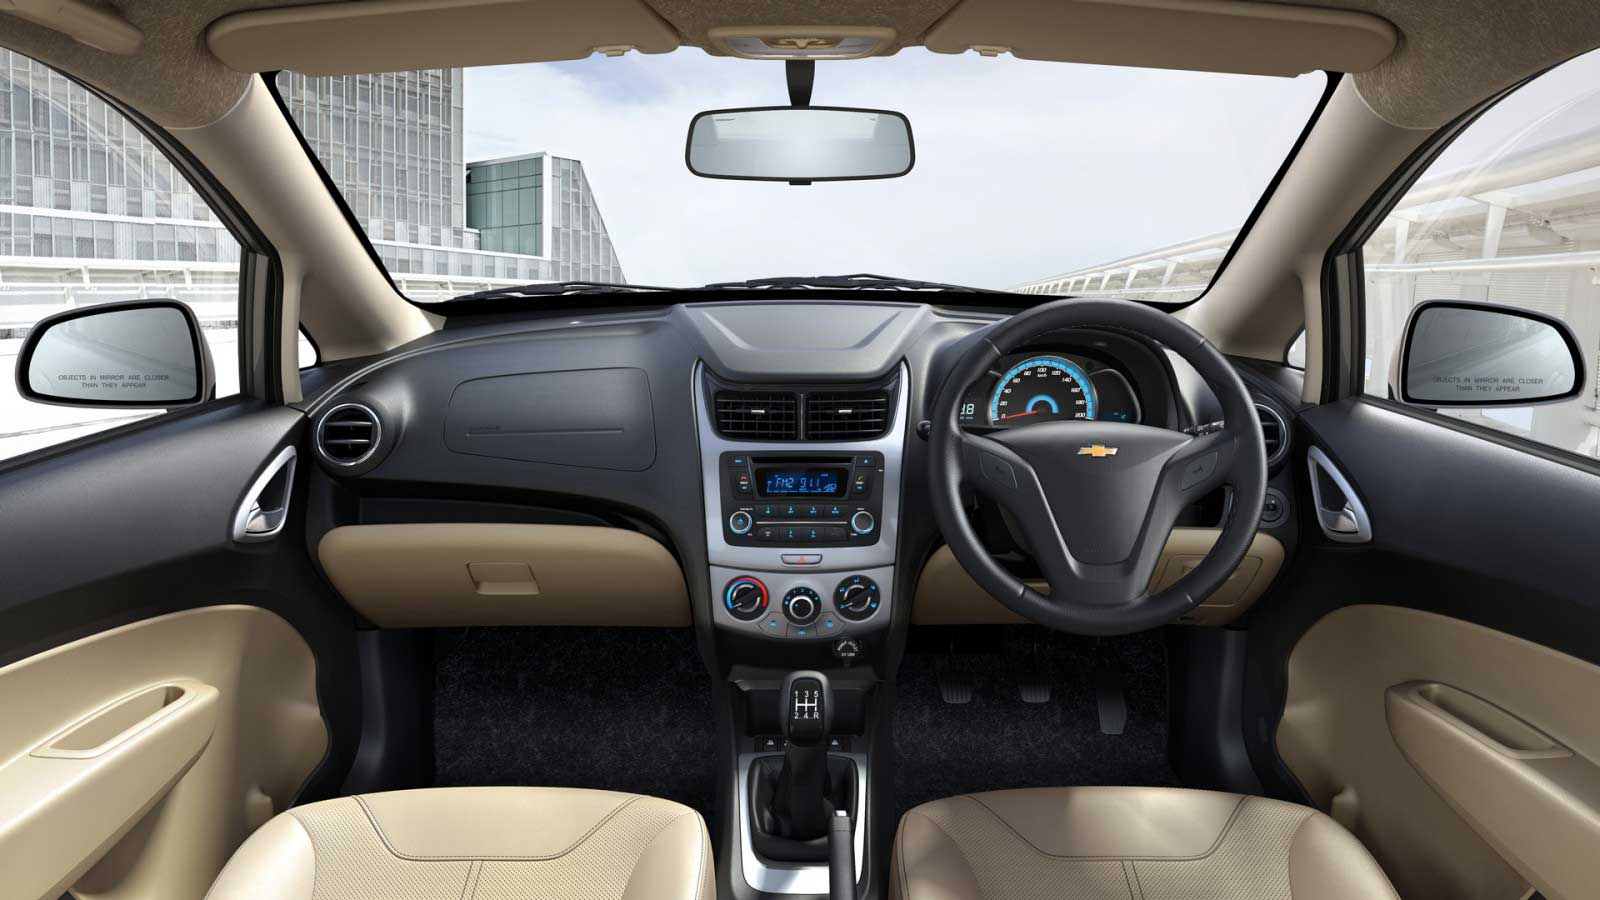 Chevrolet Sail 1.3 LT ABS Interior front view